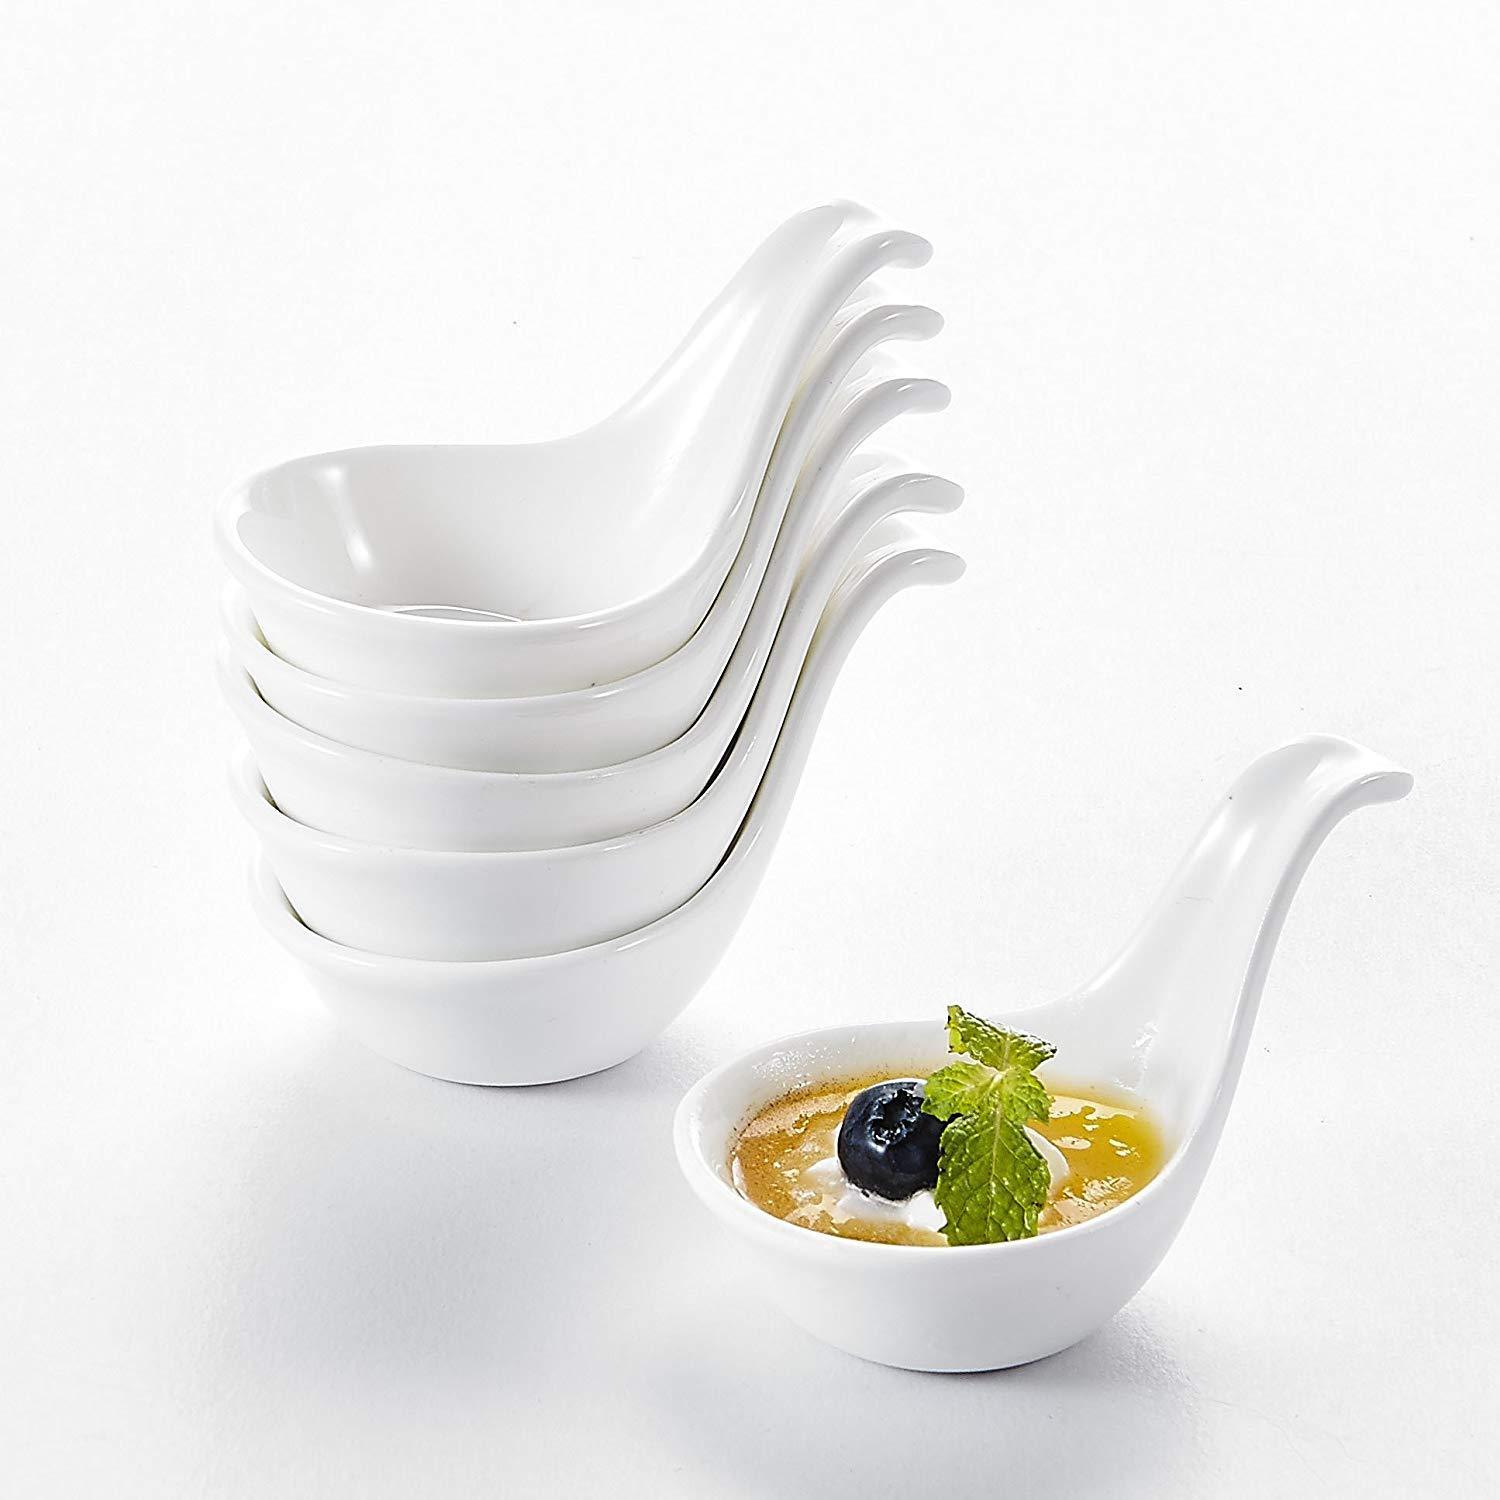 White Porcelain Set of 12 Ramekins (3.75") - Nordic Side - 12, 375, and, Baking, Bowl, Brulee, Cream, Creme, Cups, Dipping, Dishes, for, Ice, MALACASA, of, Porcelain, Ramekins, Set, Snack, So